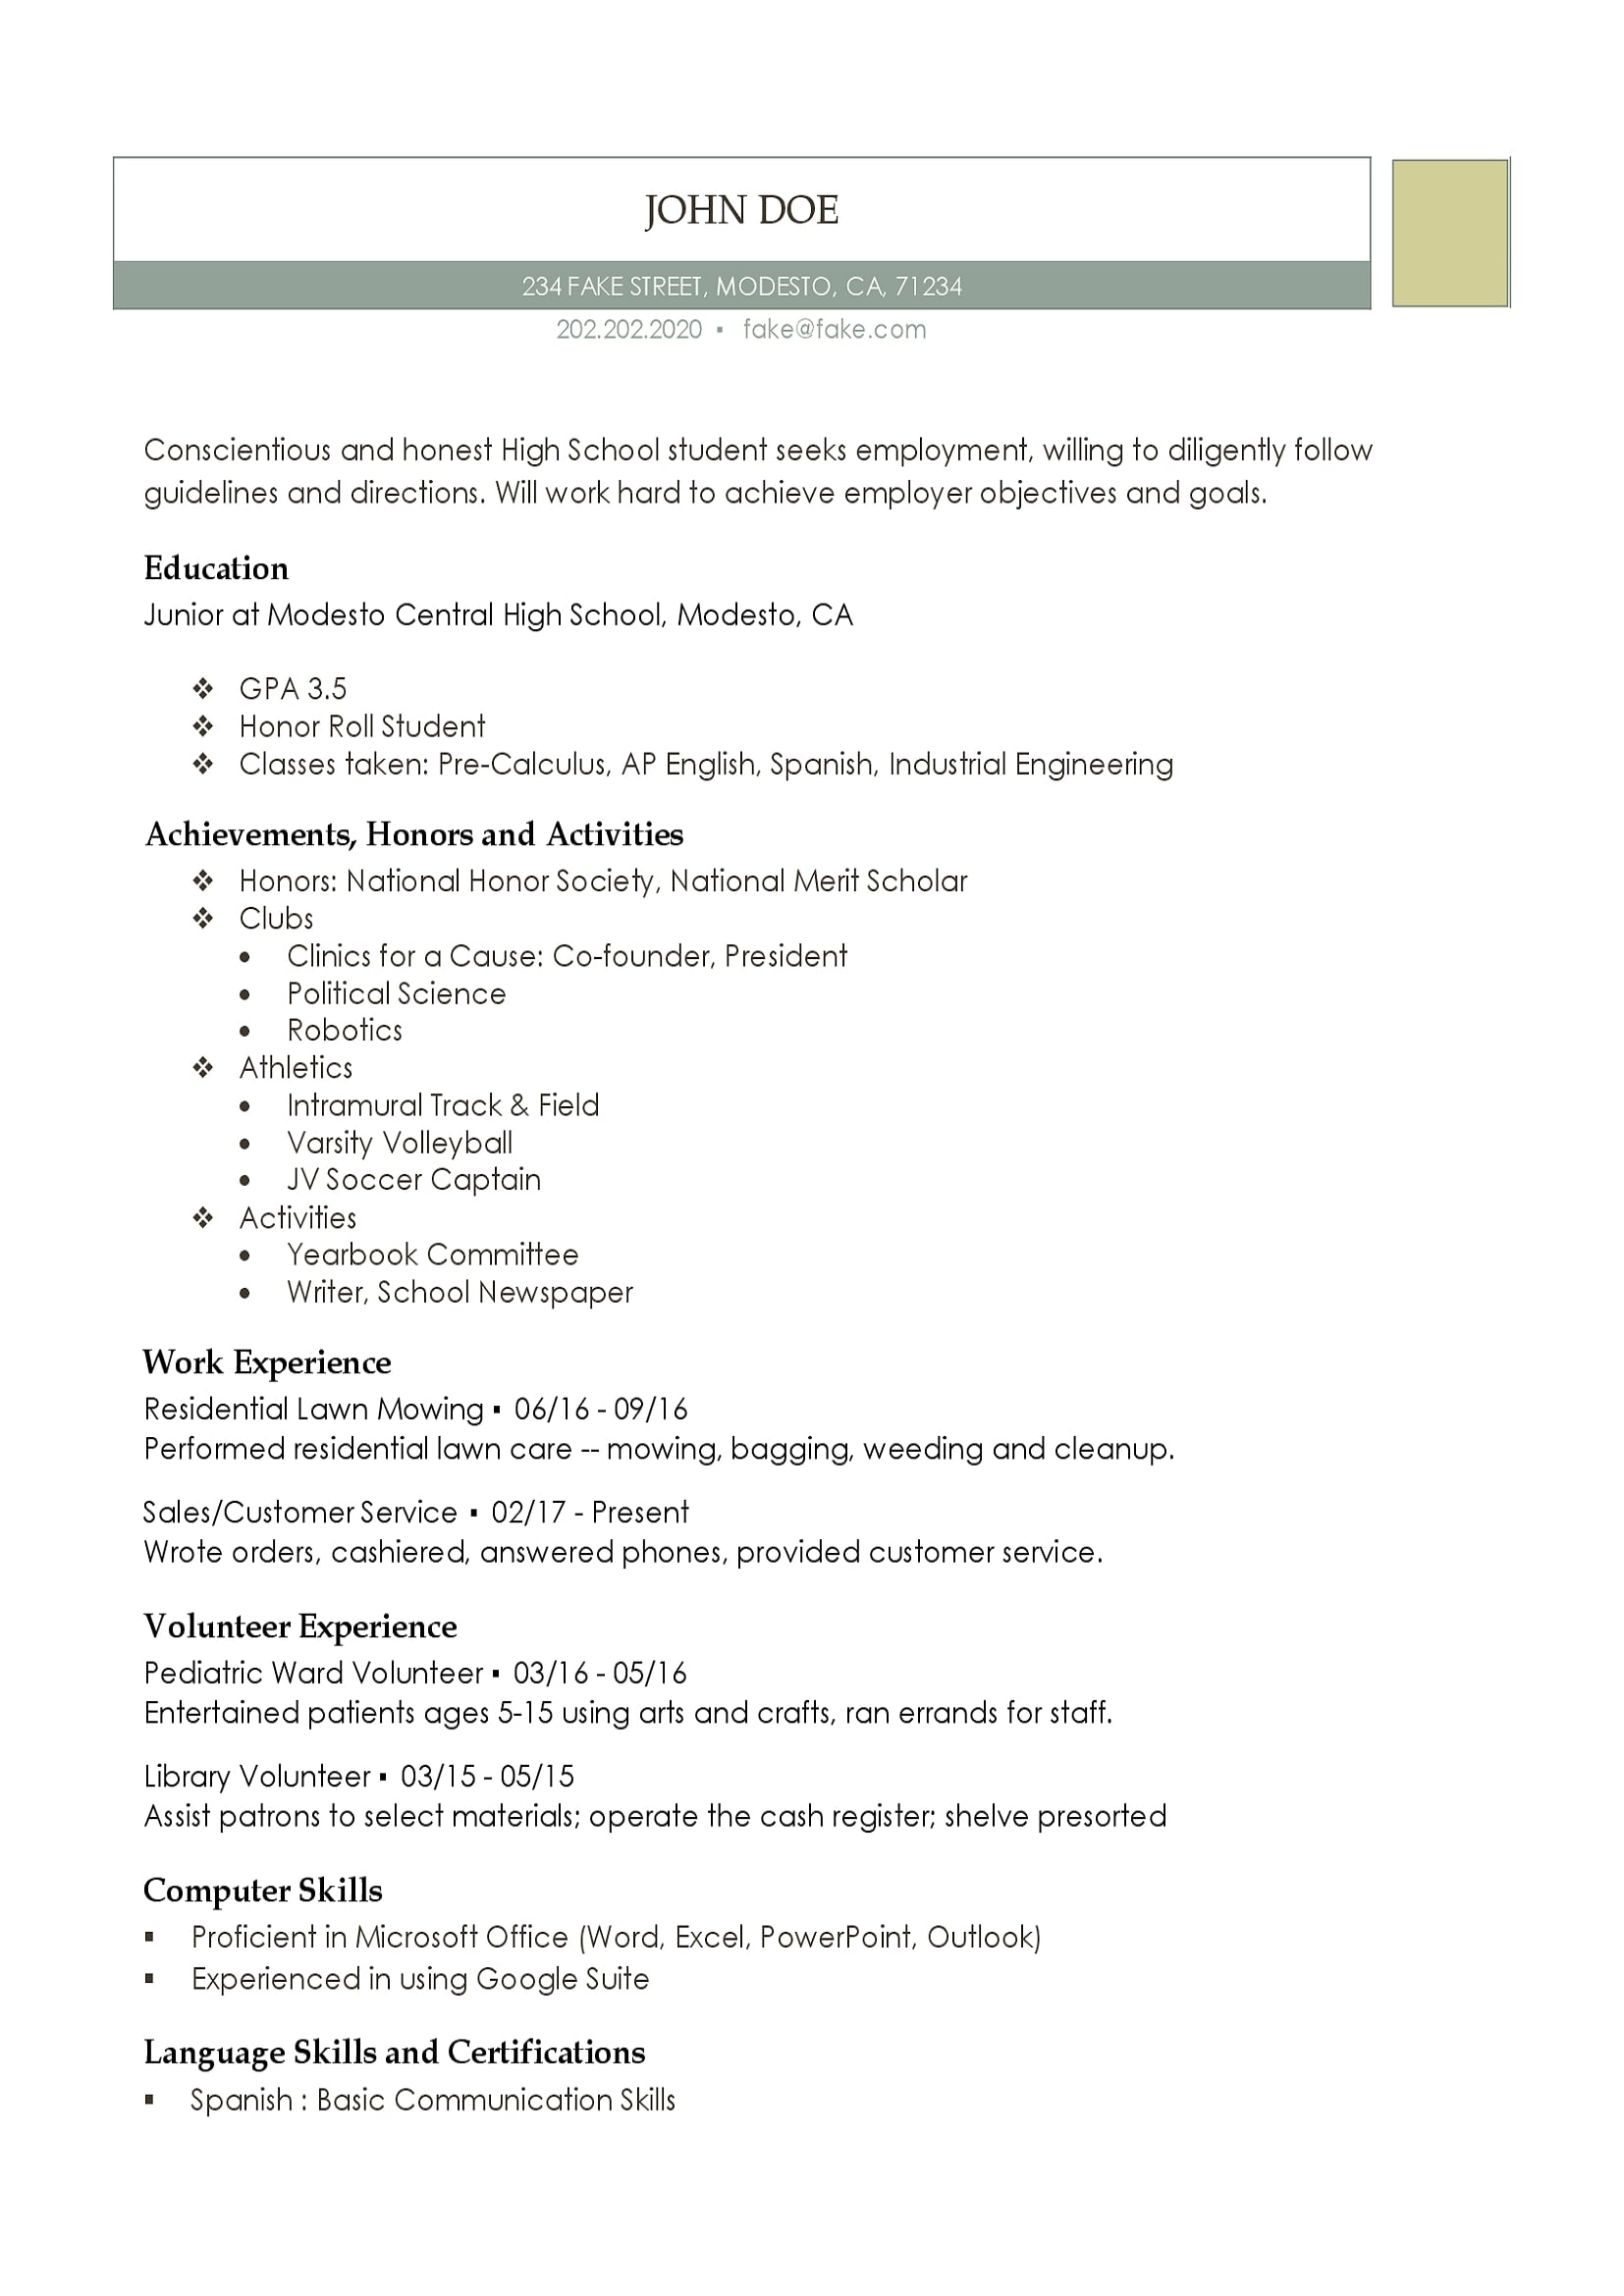 resume for high school student